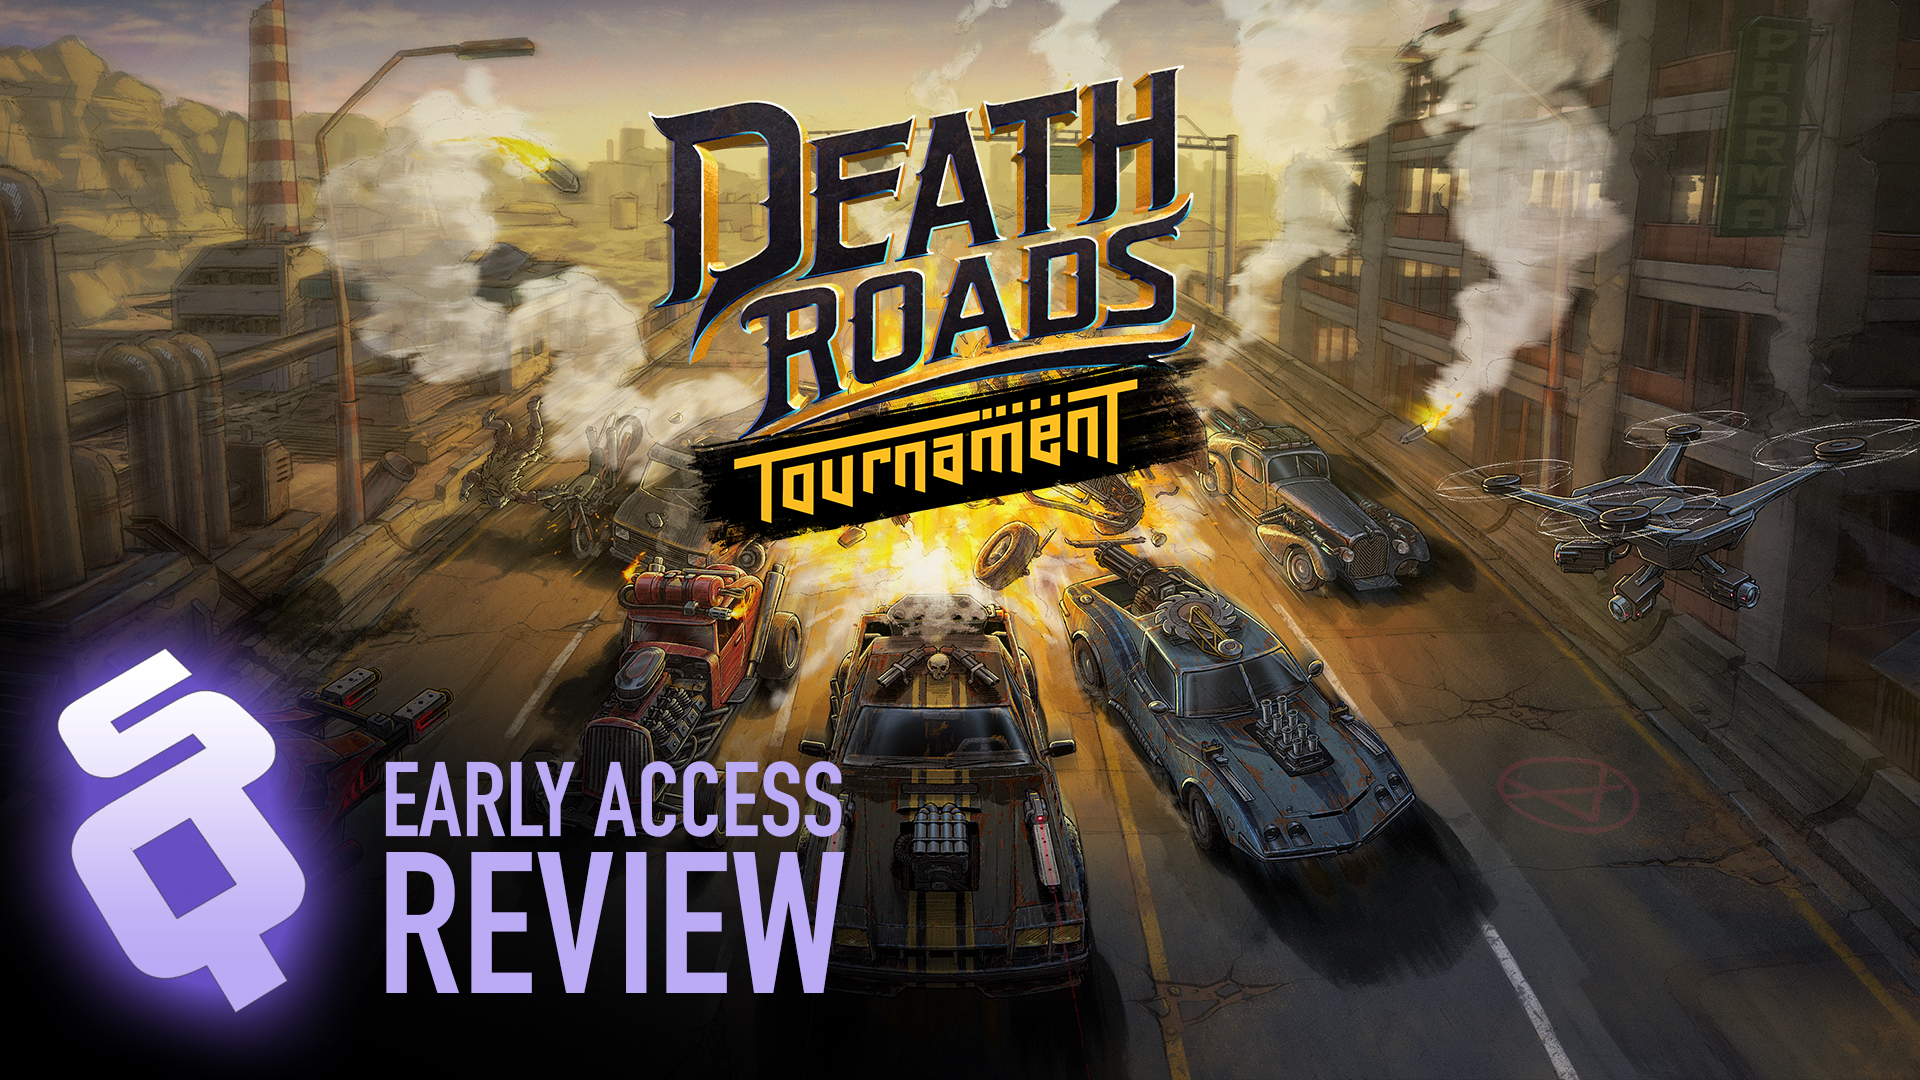 Hot Take: Death Roads: Tournament early access review